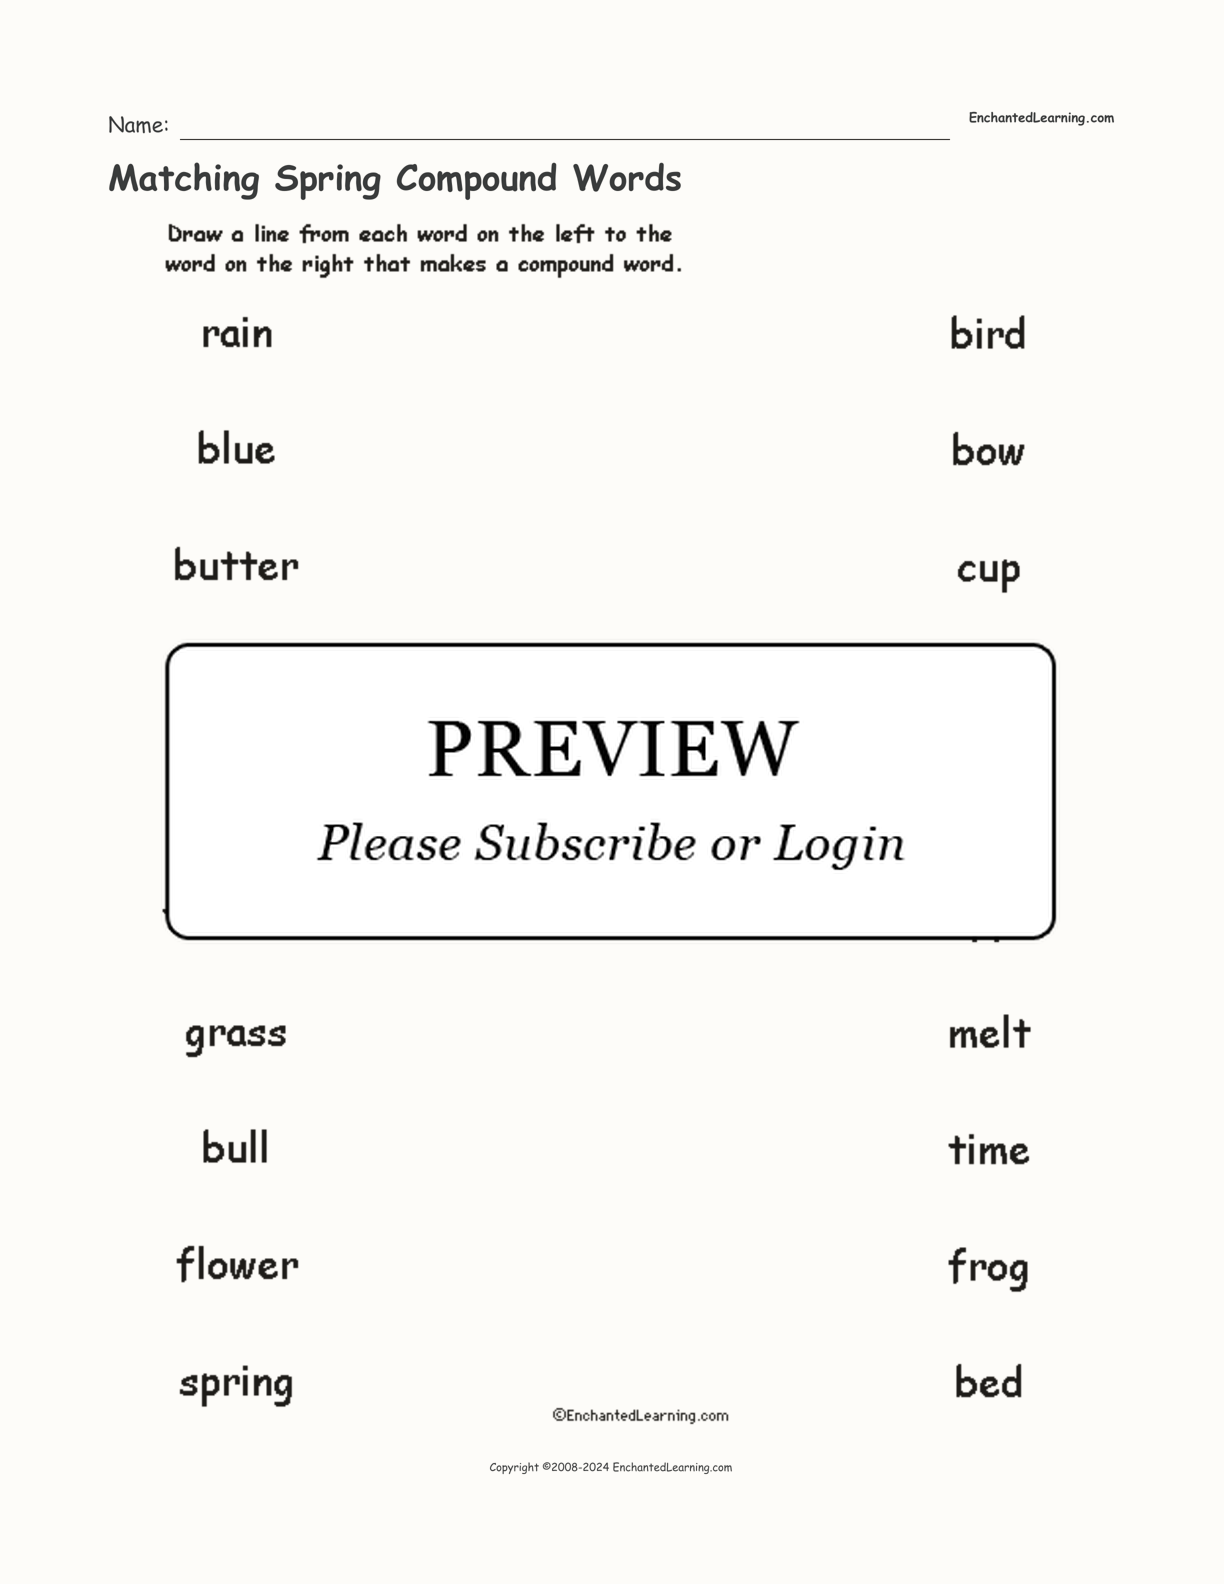 Matching Spring Compound Words interactive worksheet page 1